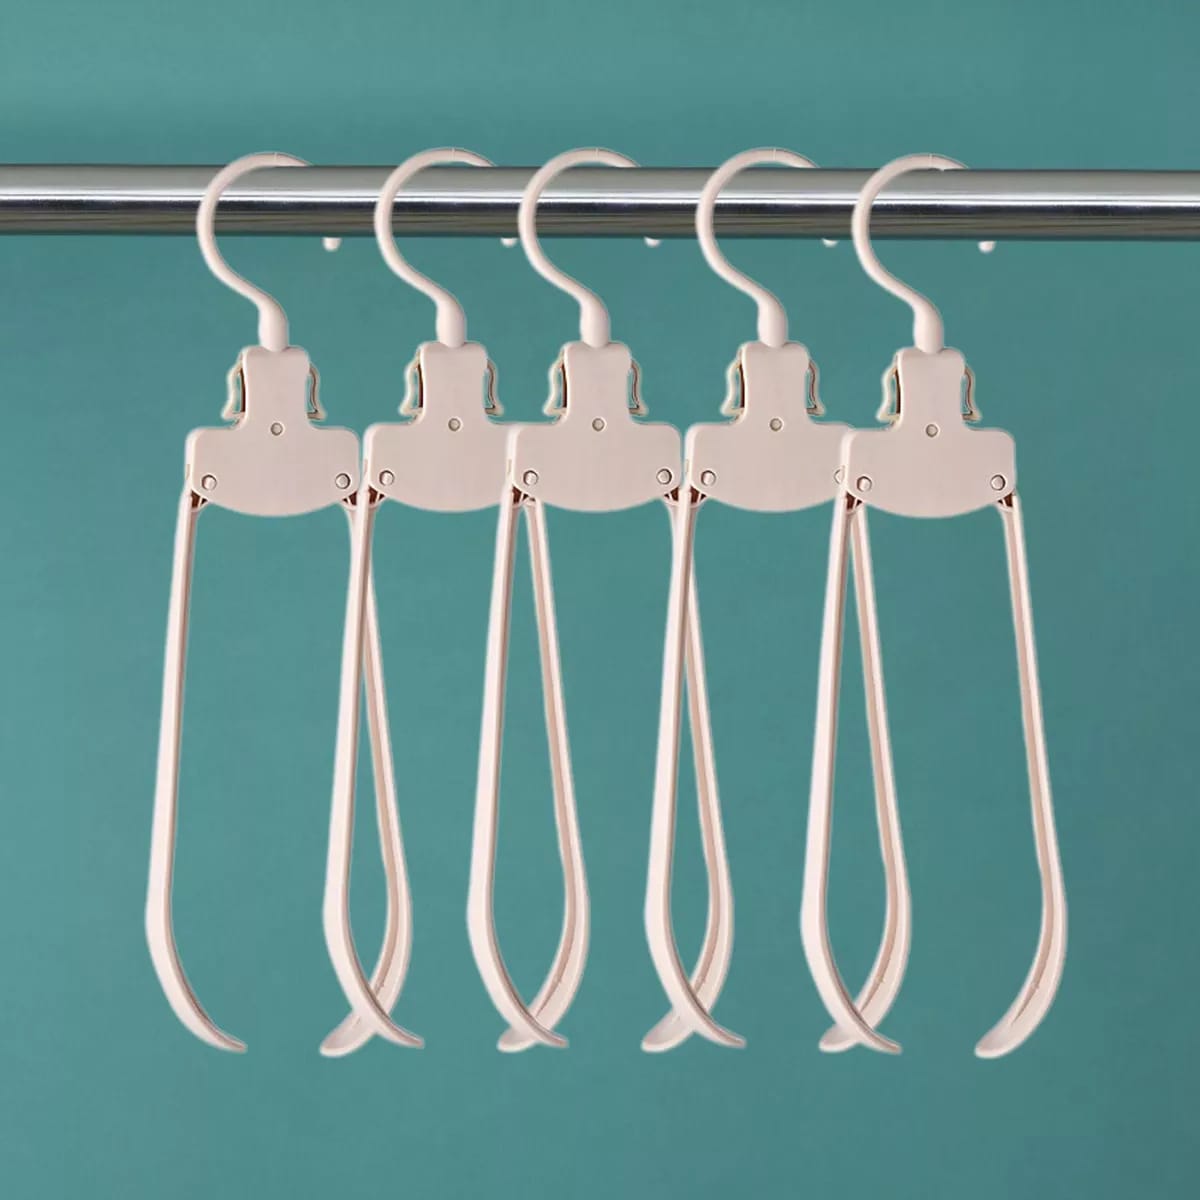 Set of Portable Cloth Holders.